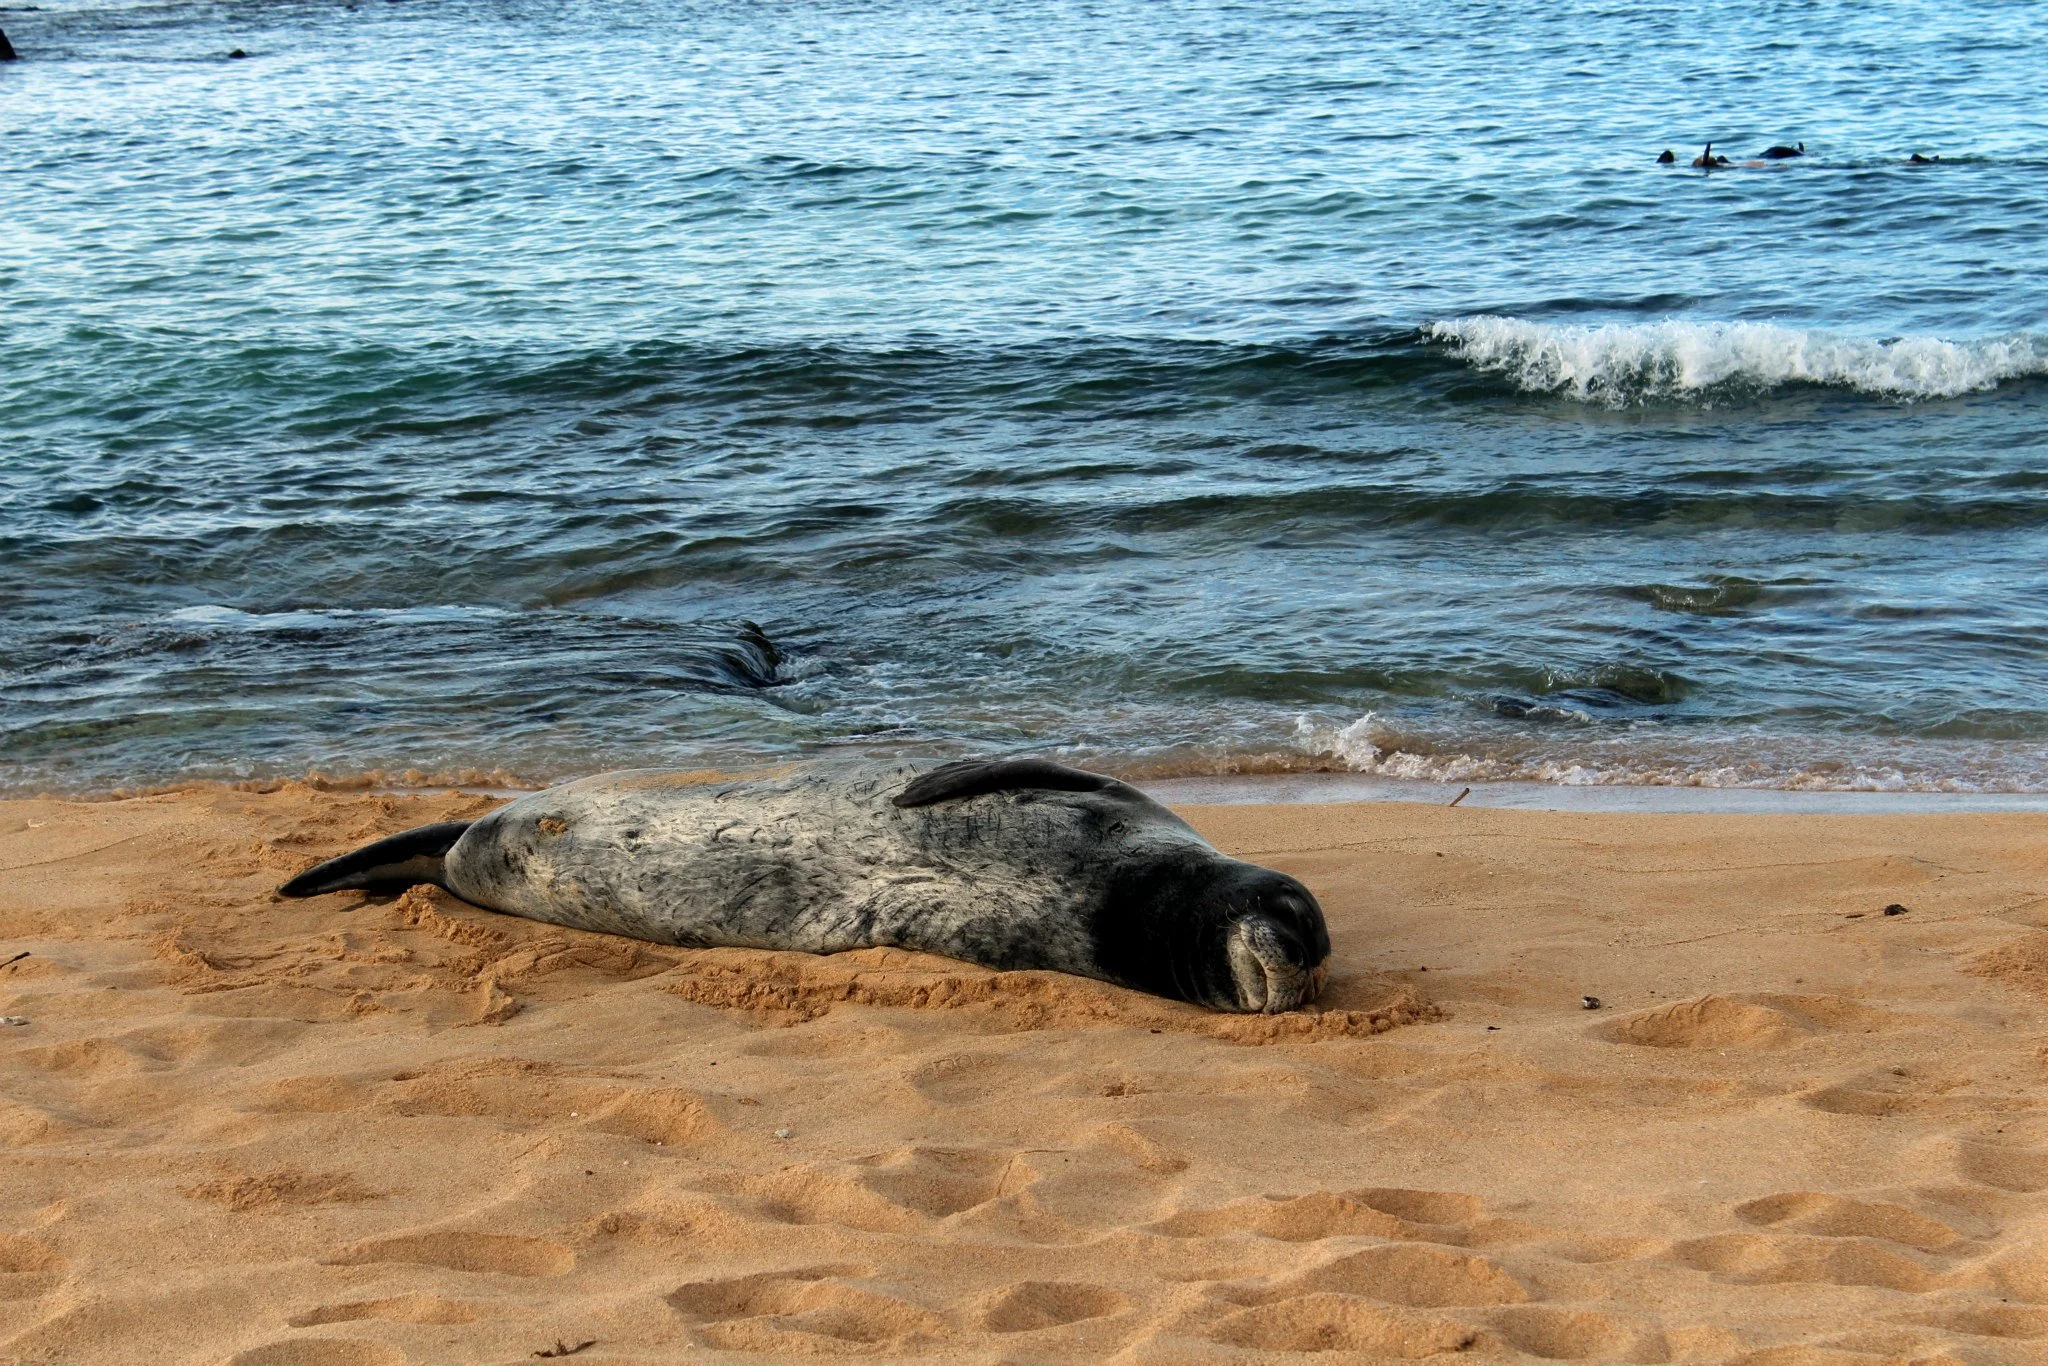 Just a seal taking a nap. 